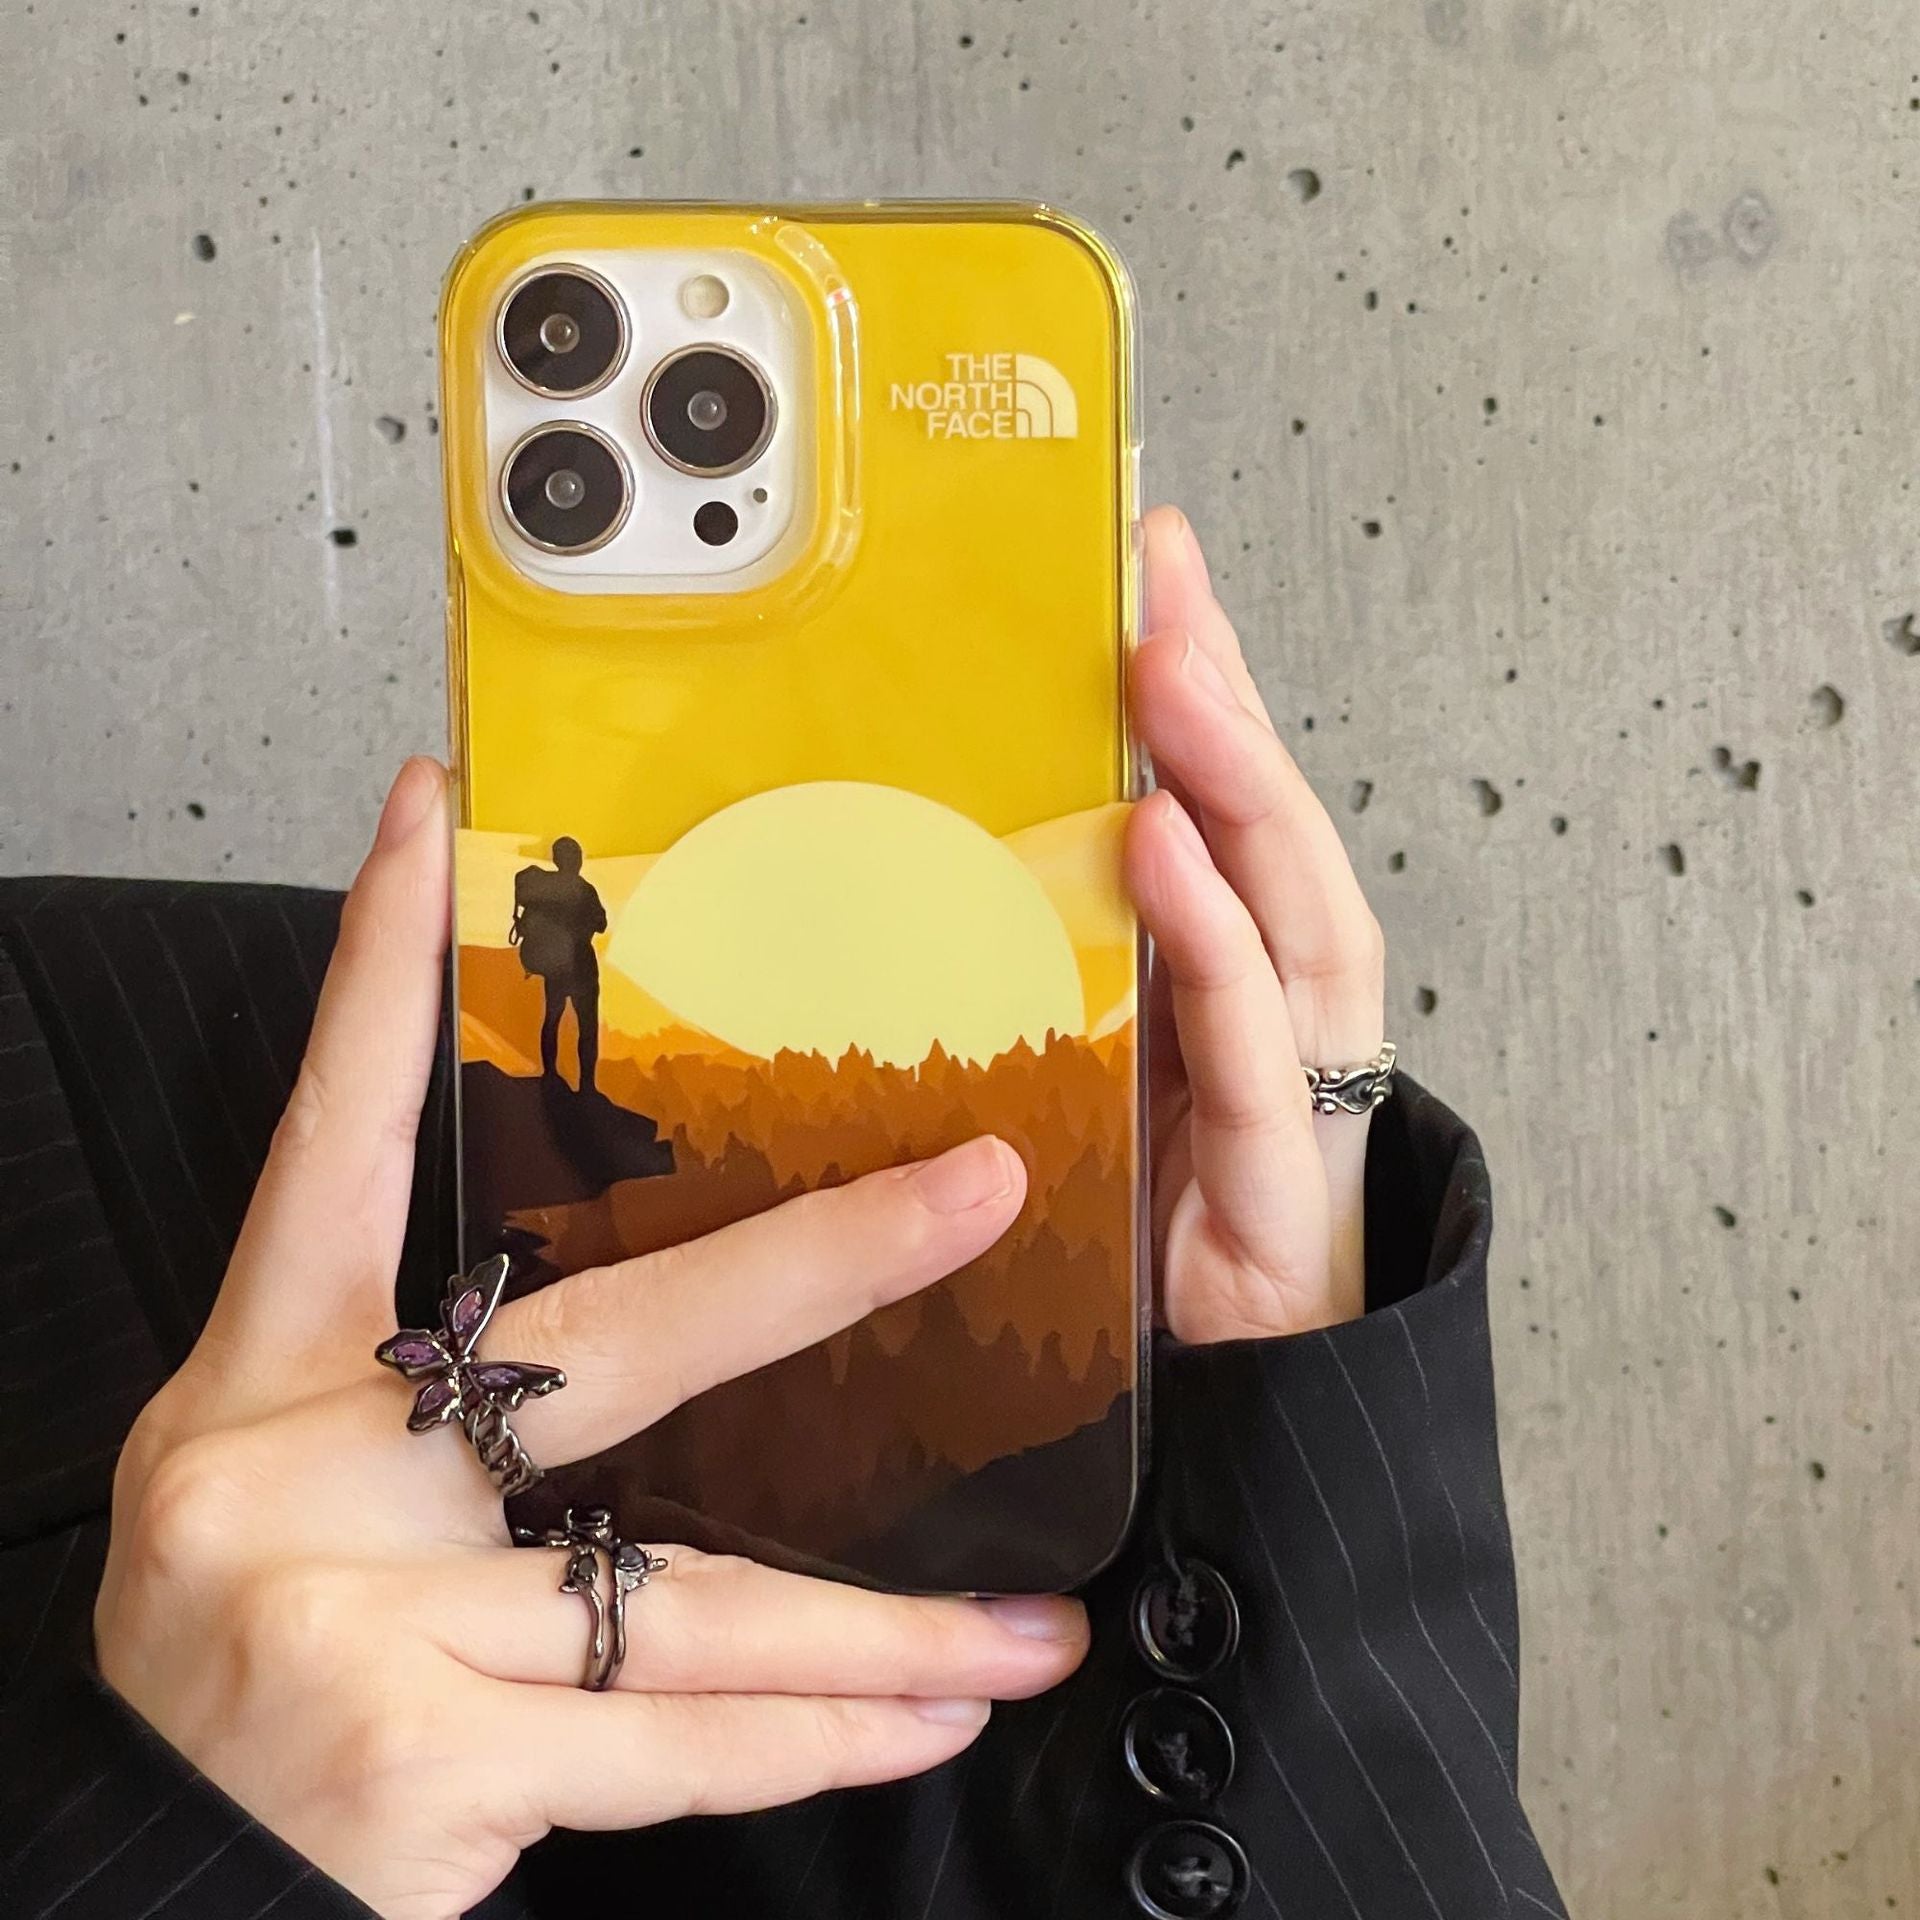 The North Face iPhone case